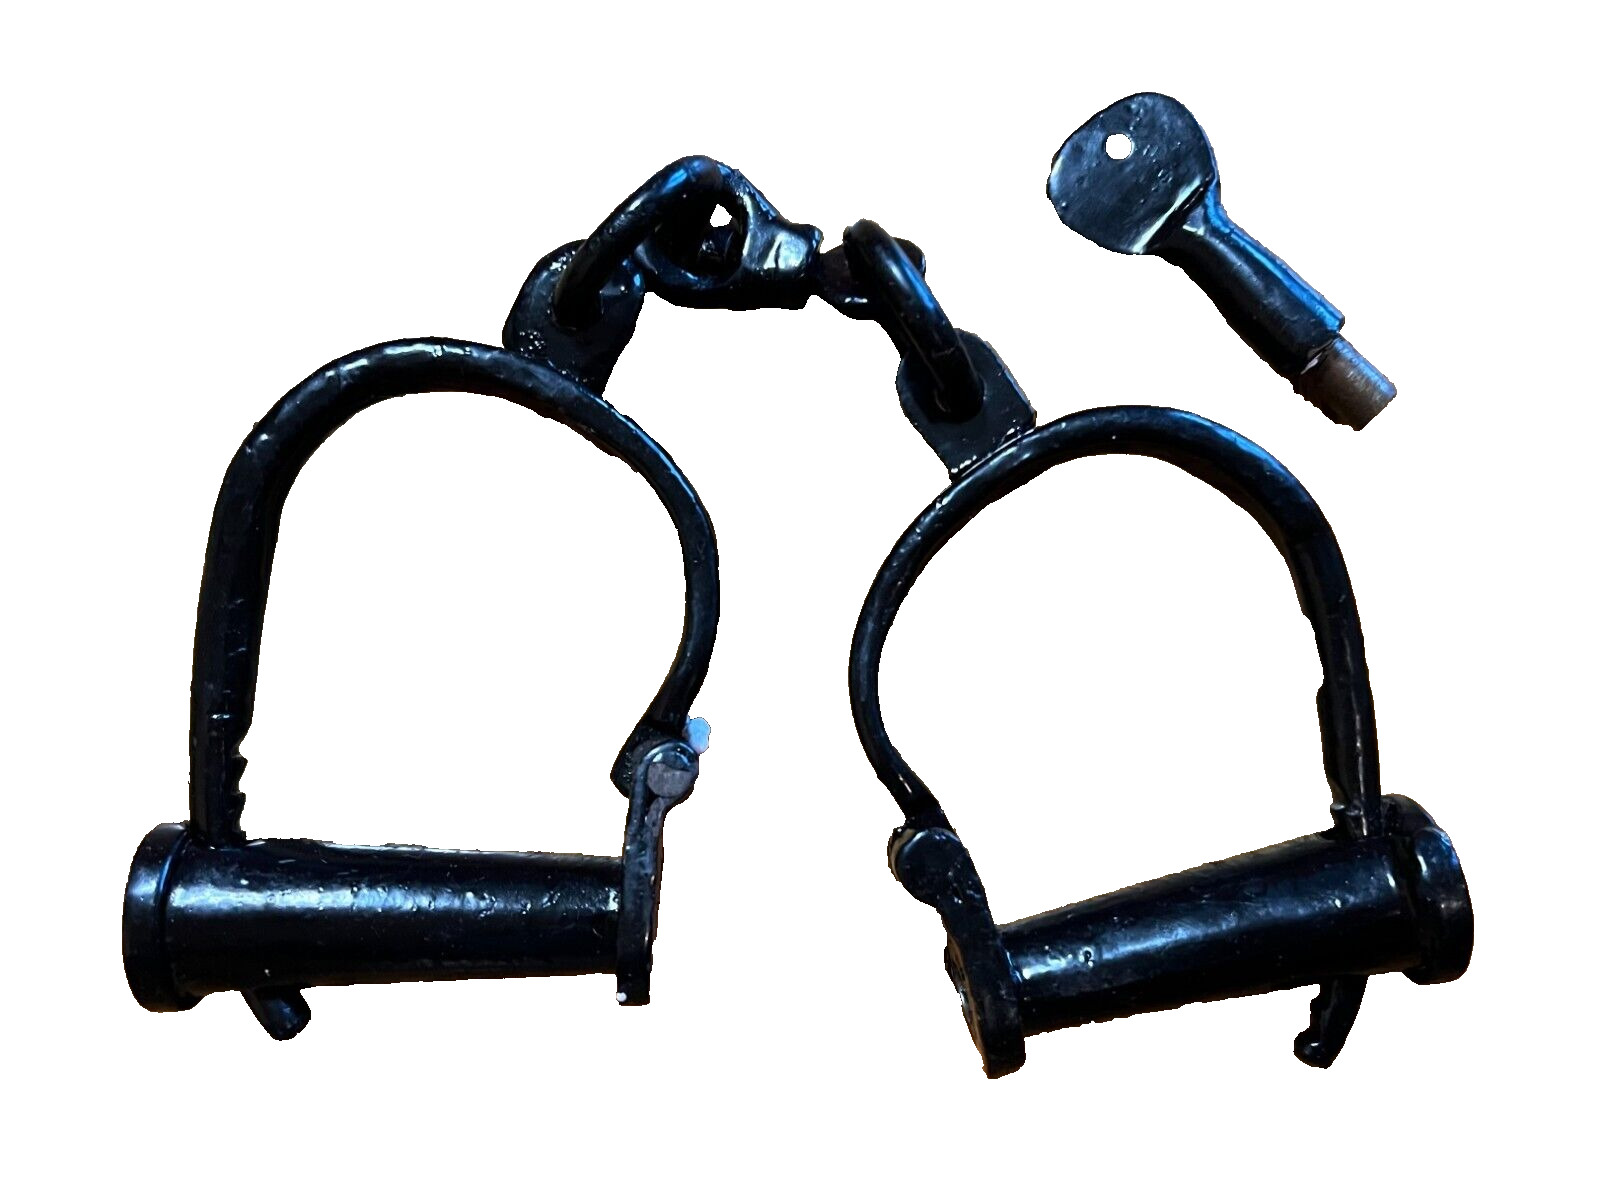 NEW Reproduction Hand Forged Medieval Dungeon Shackles Cuffs